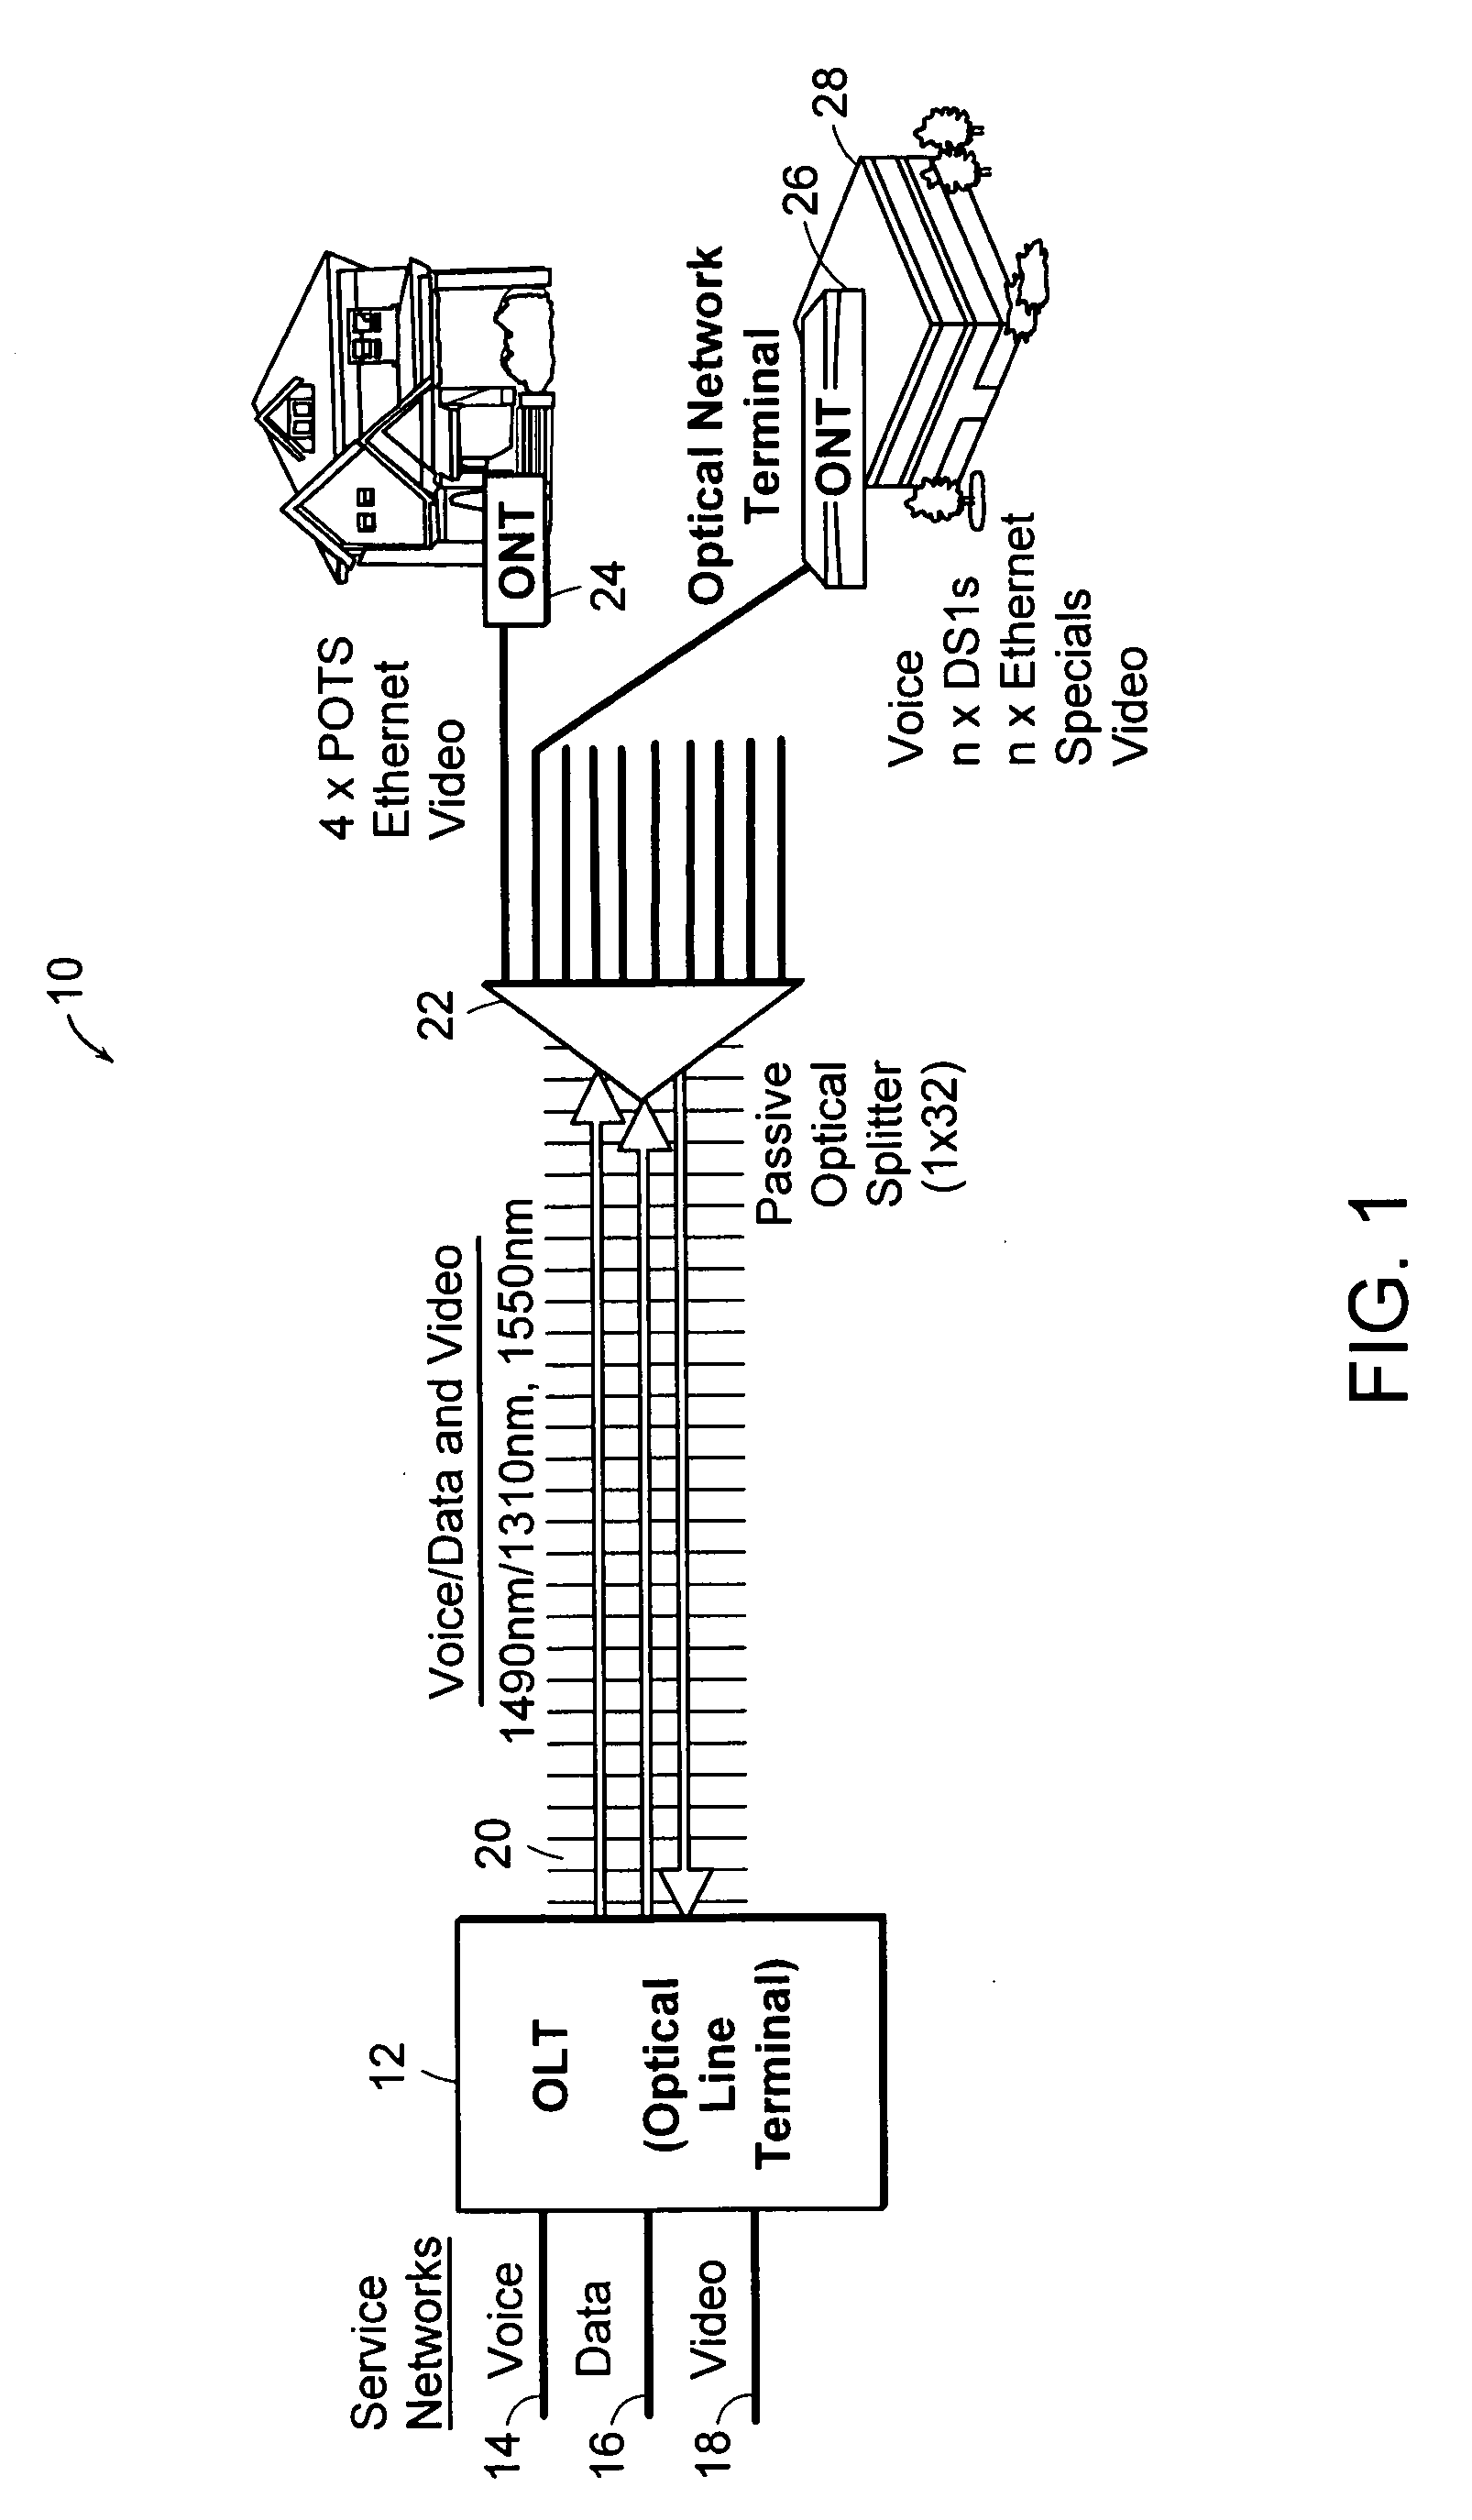 Systems and methods for managing optical fibers and components within an enclosure in an optical communications networks